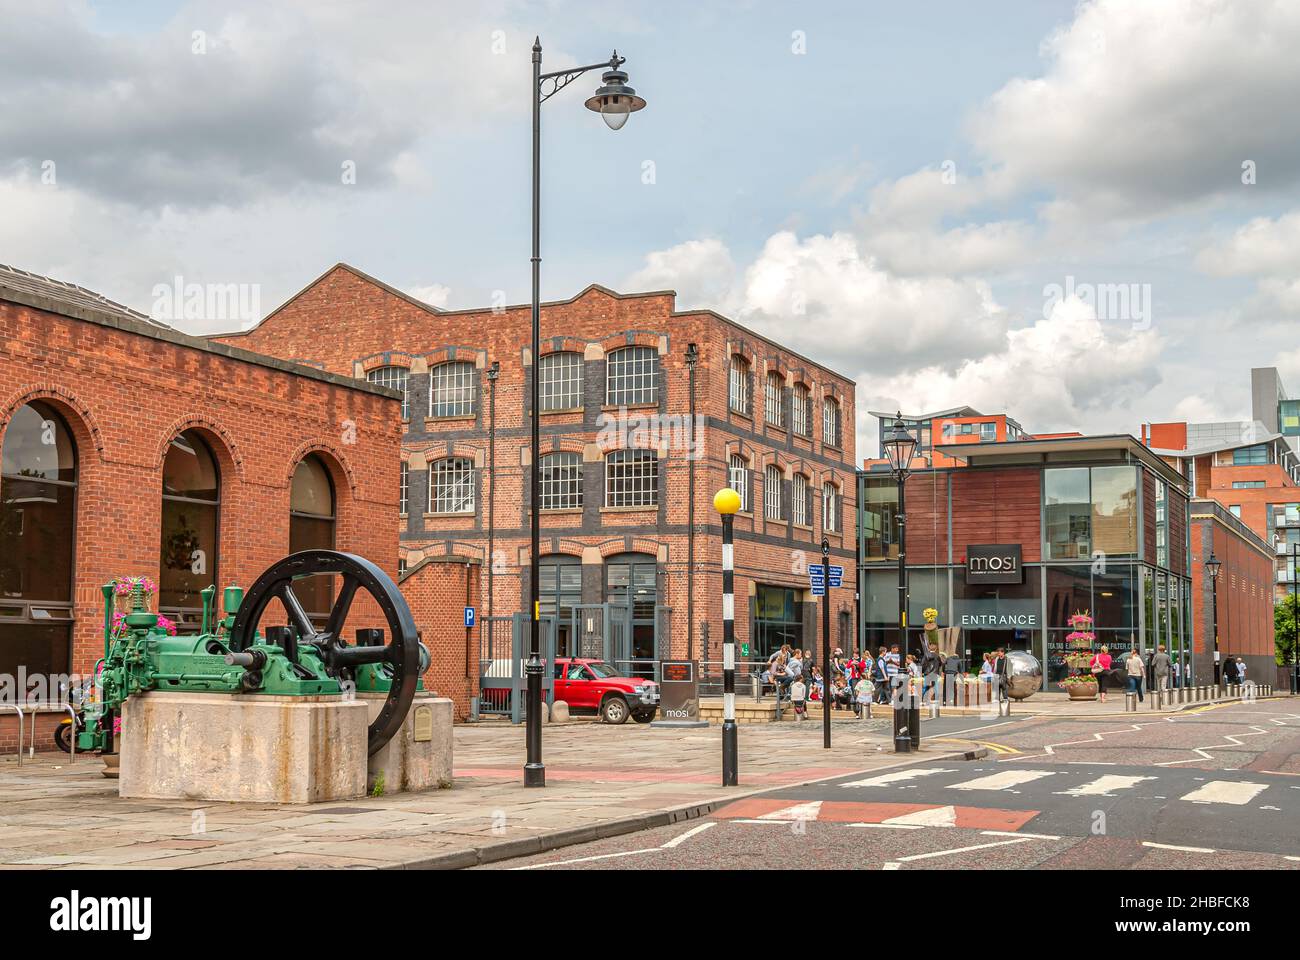 Das Museum of Science and Industry in Manchester (MOSI) in Manchester, England Stockfoto